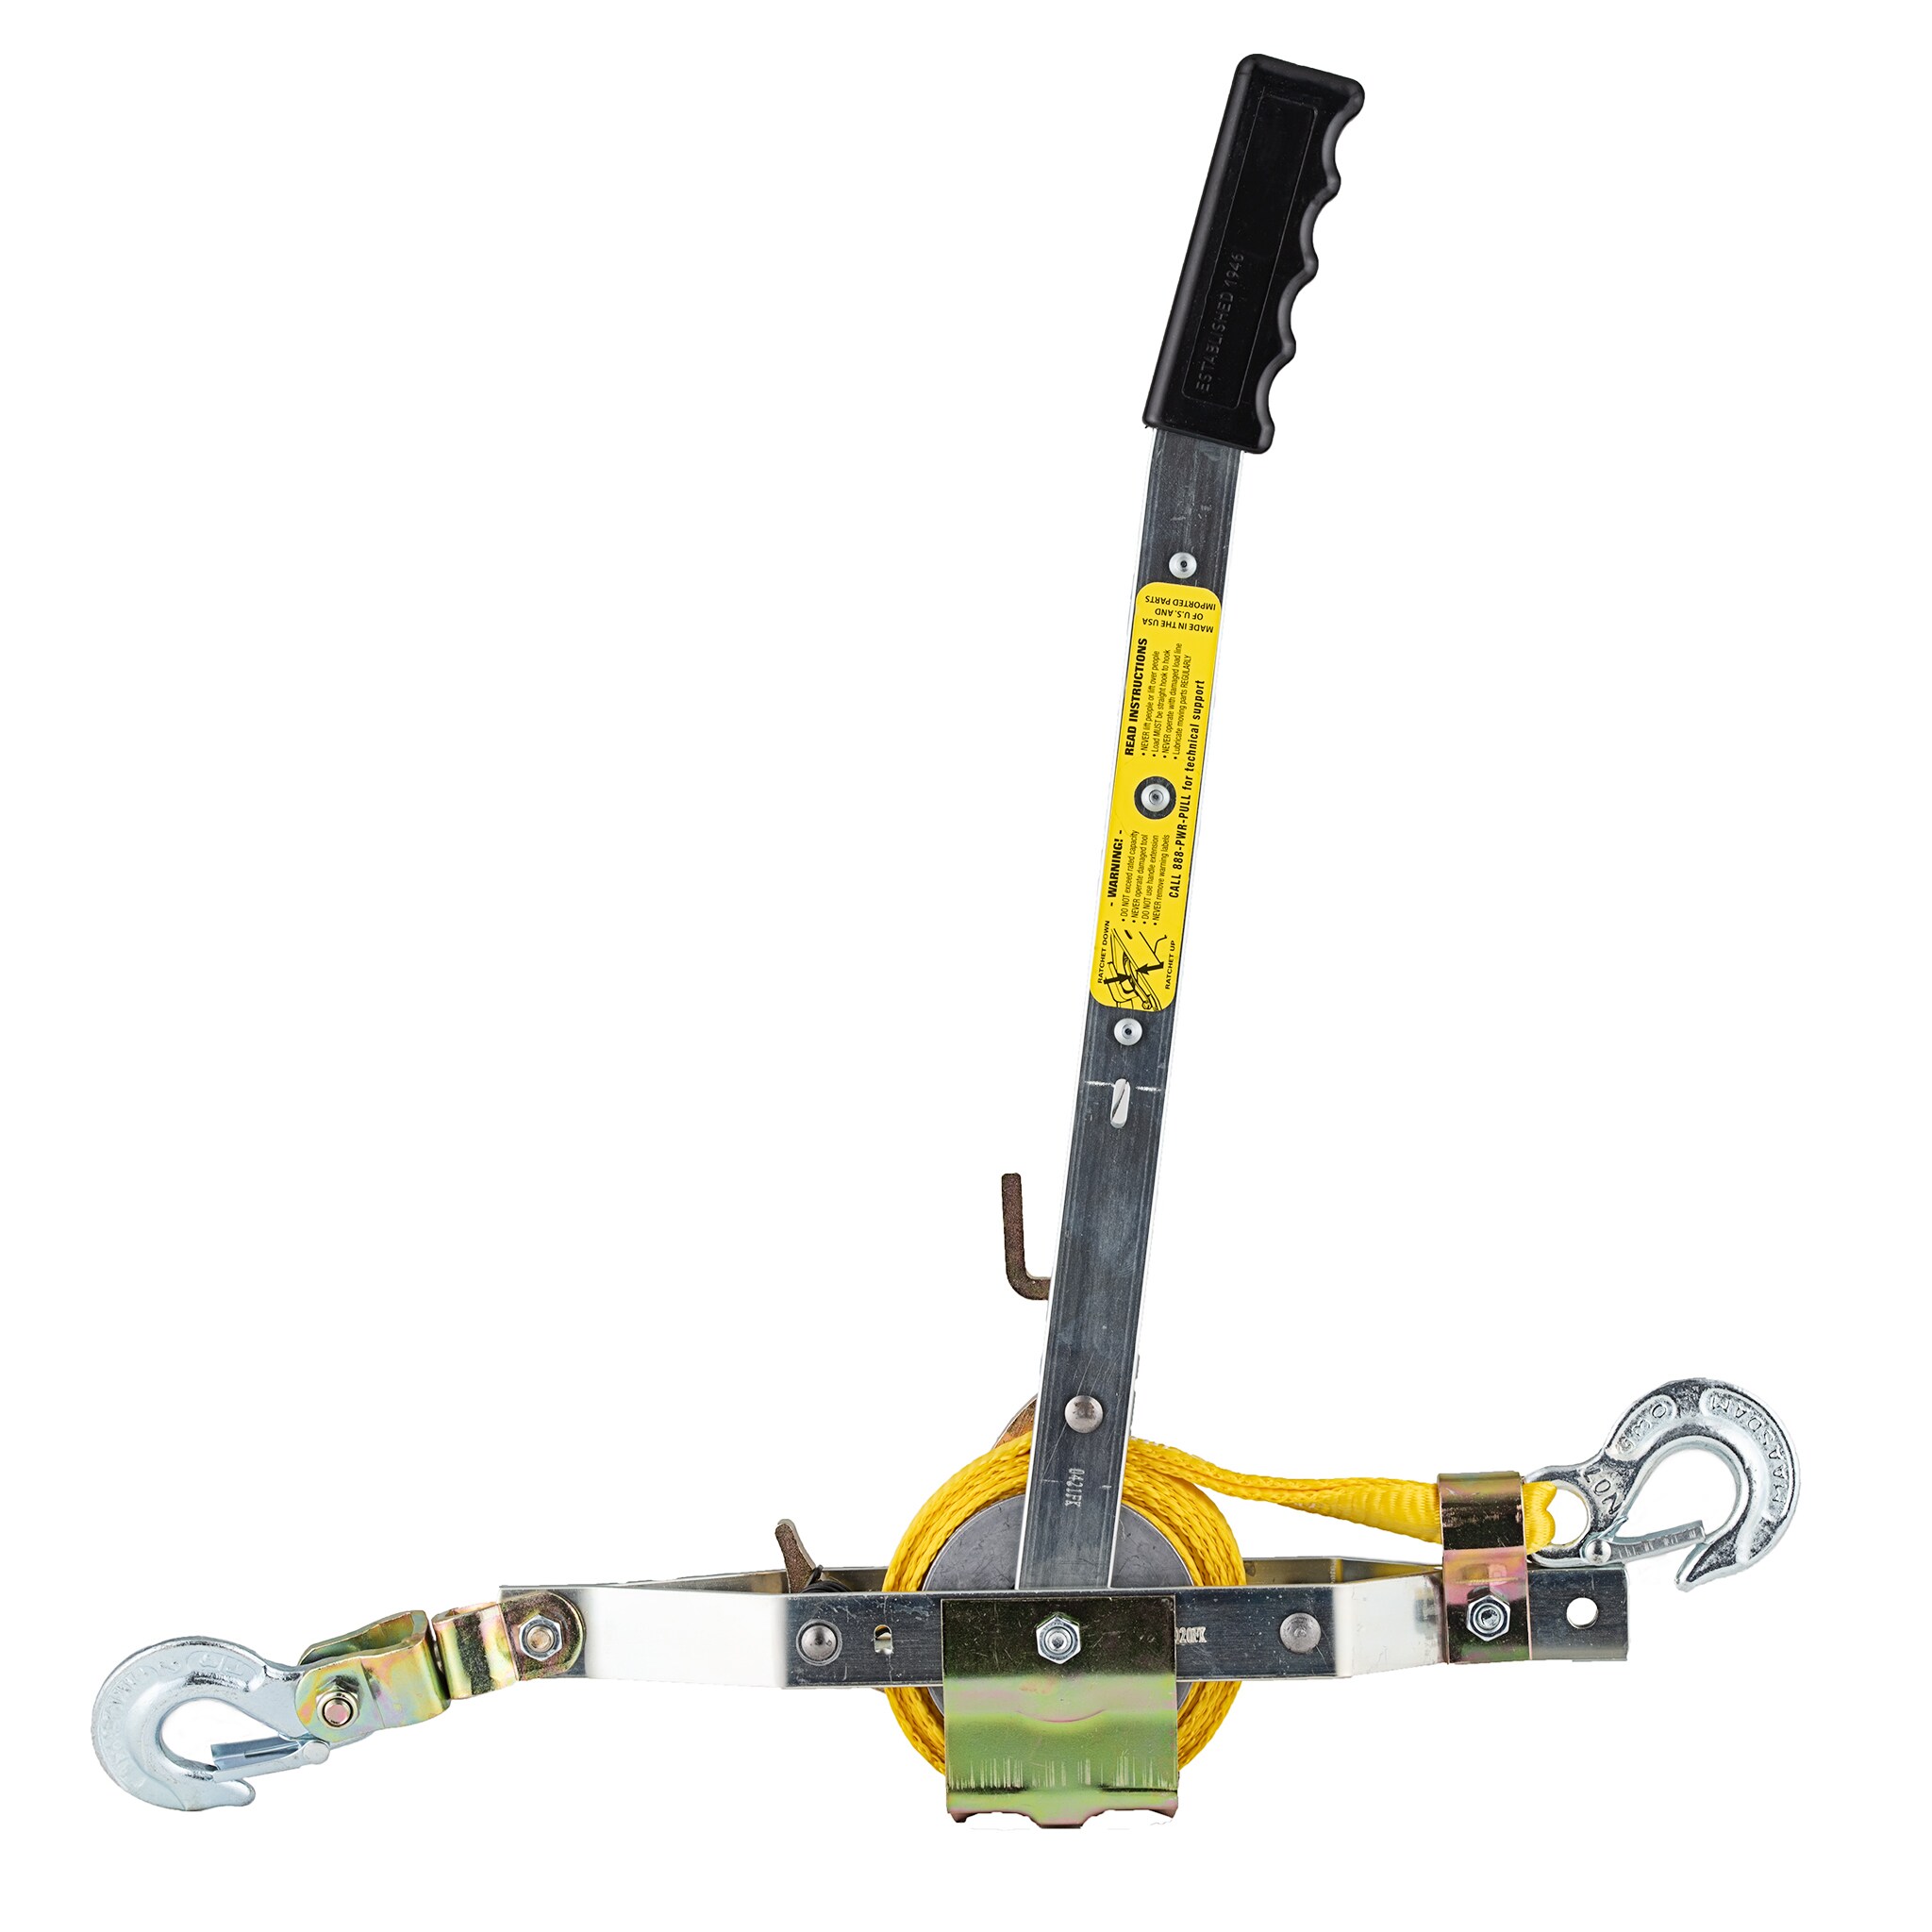 MAASDAM 1 Ton Strap Puller (12 Ft. Strap) in the Specialty